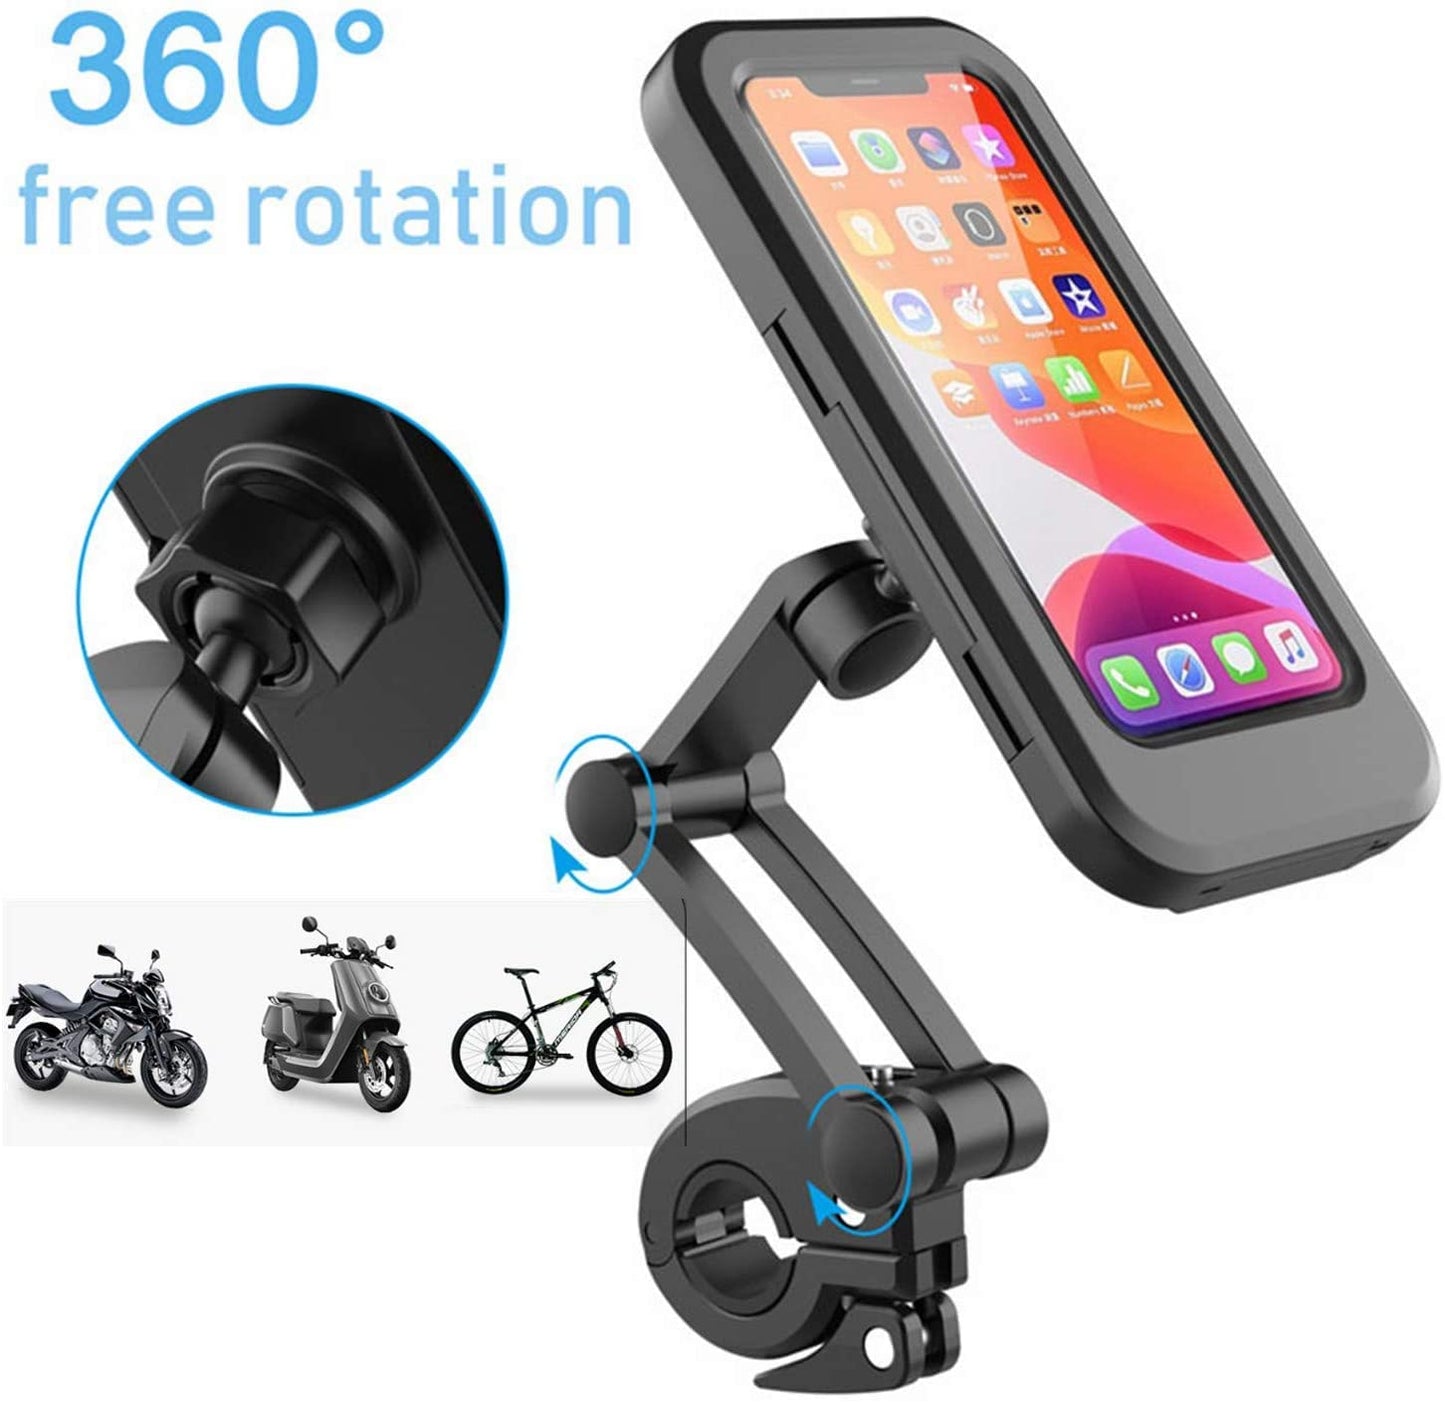 Bike Phone Holder Waterproof Mobile Phone Case for Bike Universal Motorcycle Phone Mount Bicycle Handlebar with Sensitive Touch Screen Fit Below 7.2 inch Smartphone (Alloy Steel, Black)